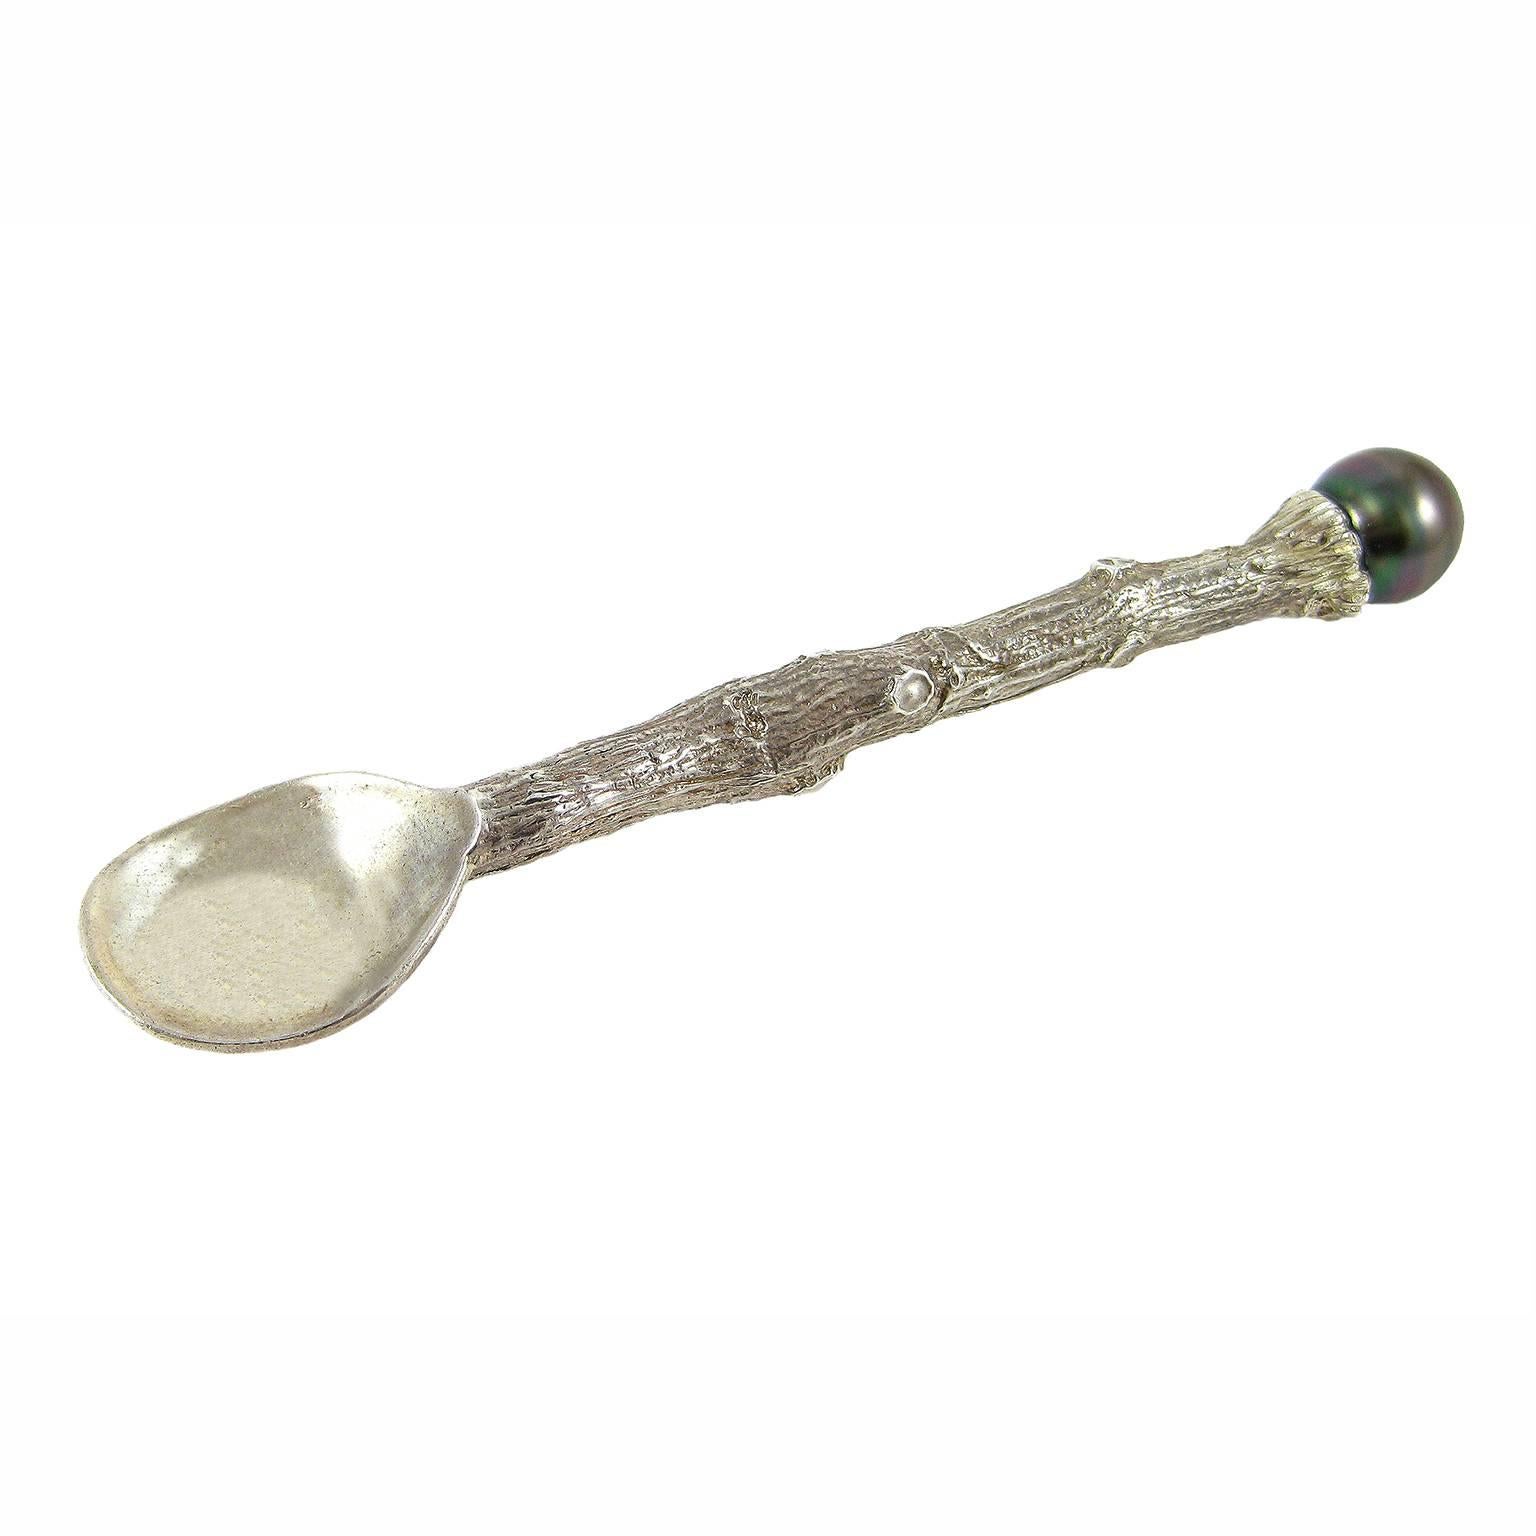 A gorgeous addition to any fashionable table, or accent to the K. Brunini salt cellar, is this delicate salt spoon in Sterling Silver with a Tahitian pearl. From the K. Brunini Object d'Art collection comes this nature-inspired and uniquely designed